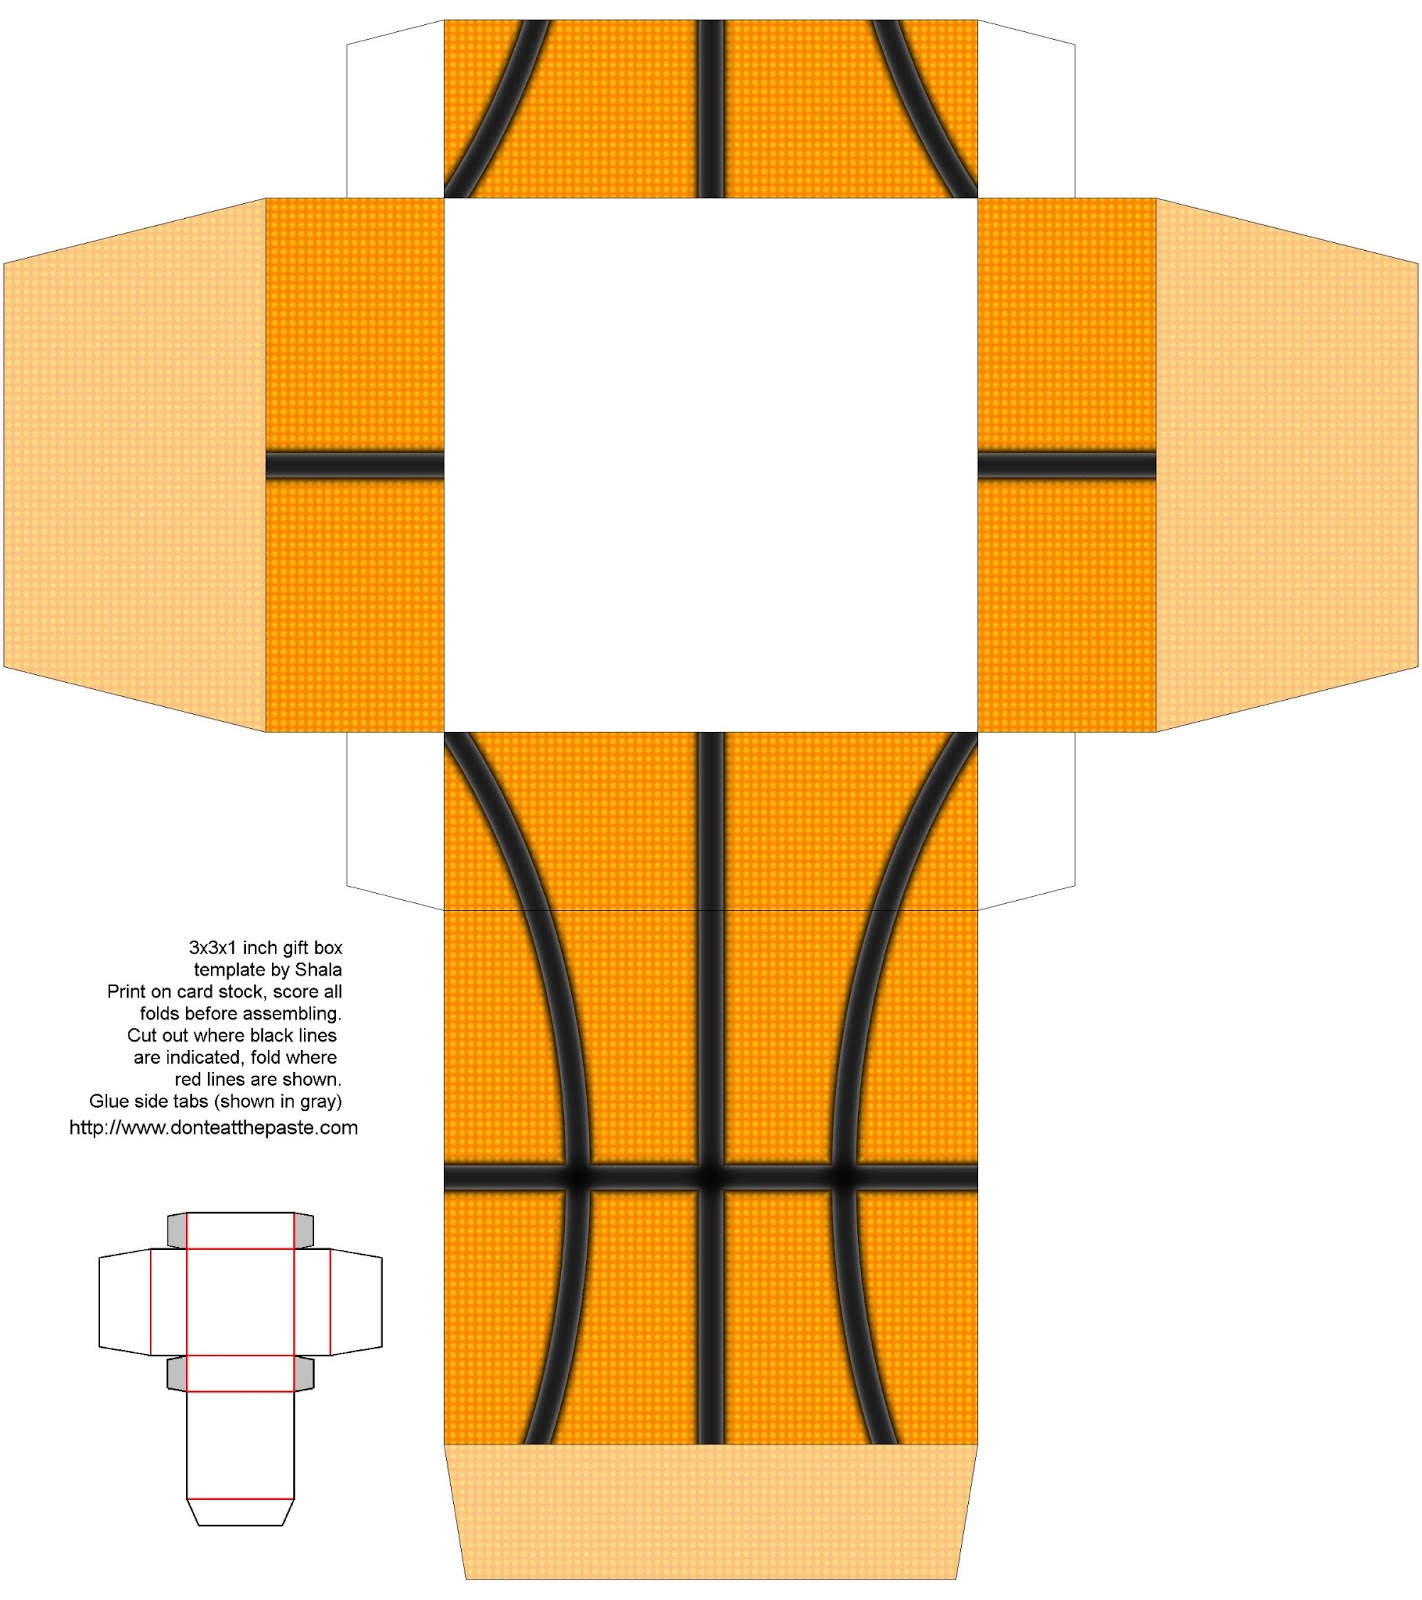 7-best-images-of-basketball-cut-out-printable-basketball-cut-out